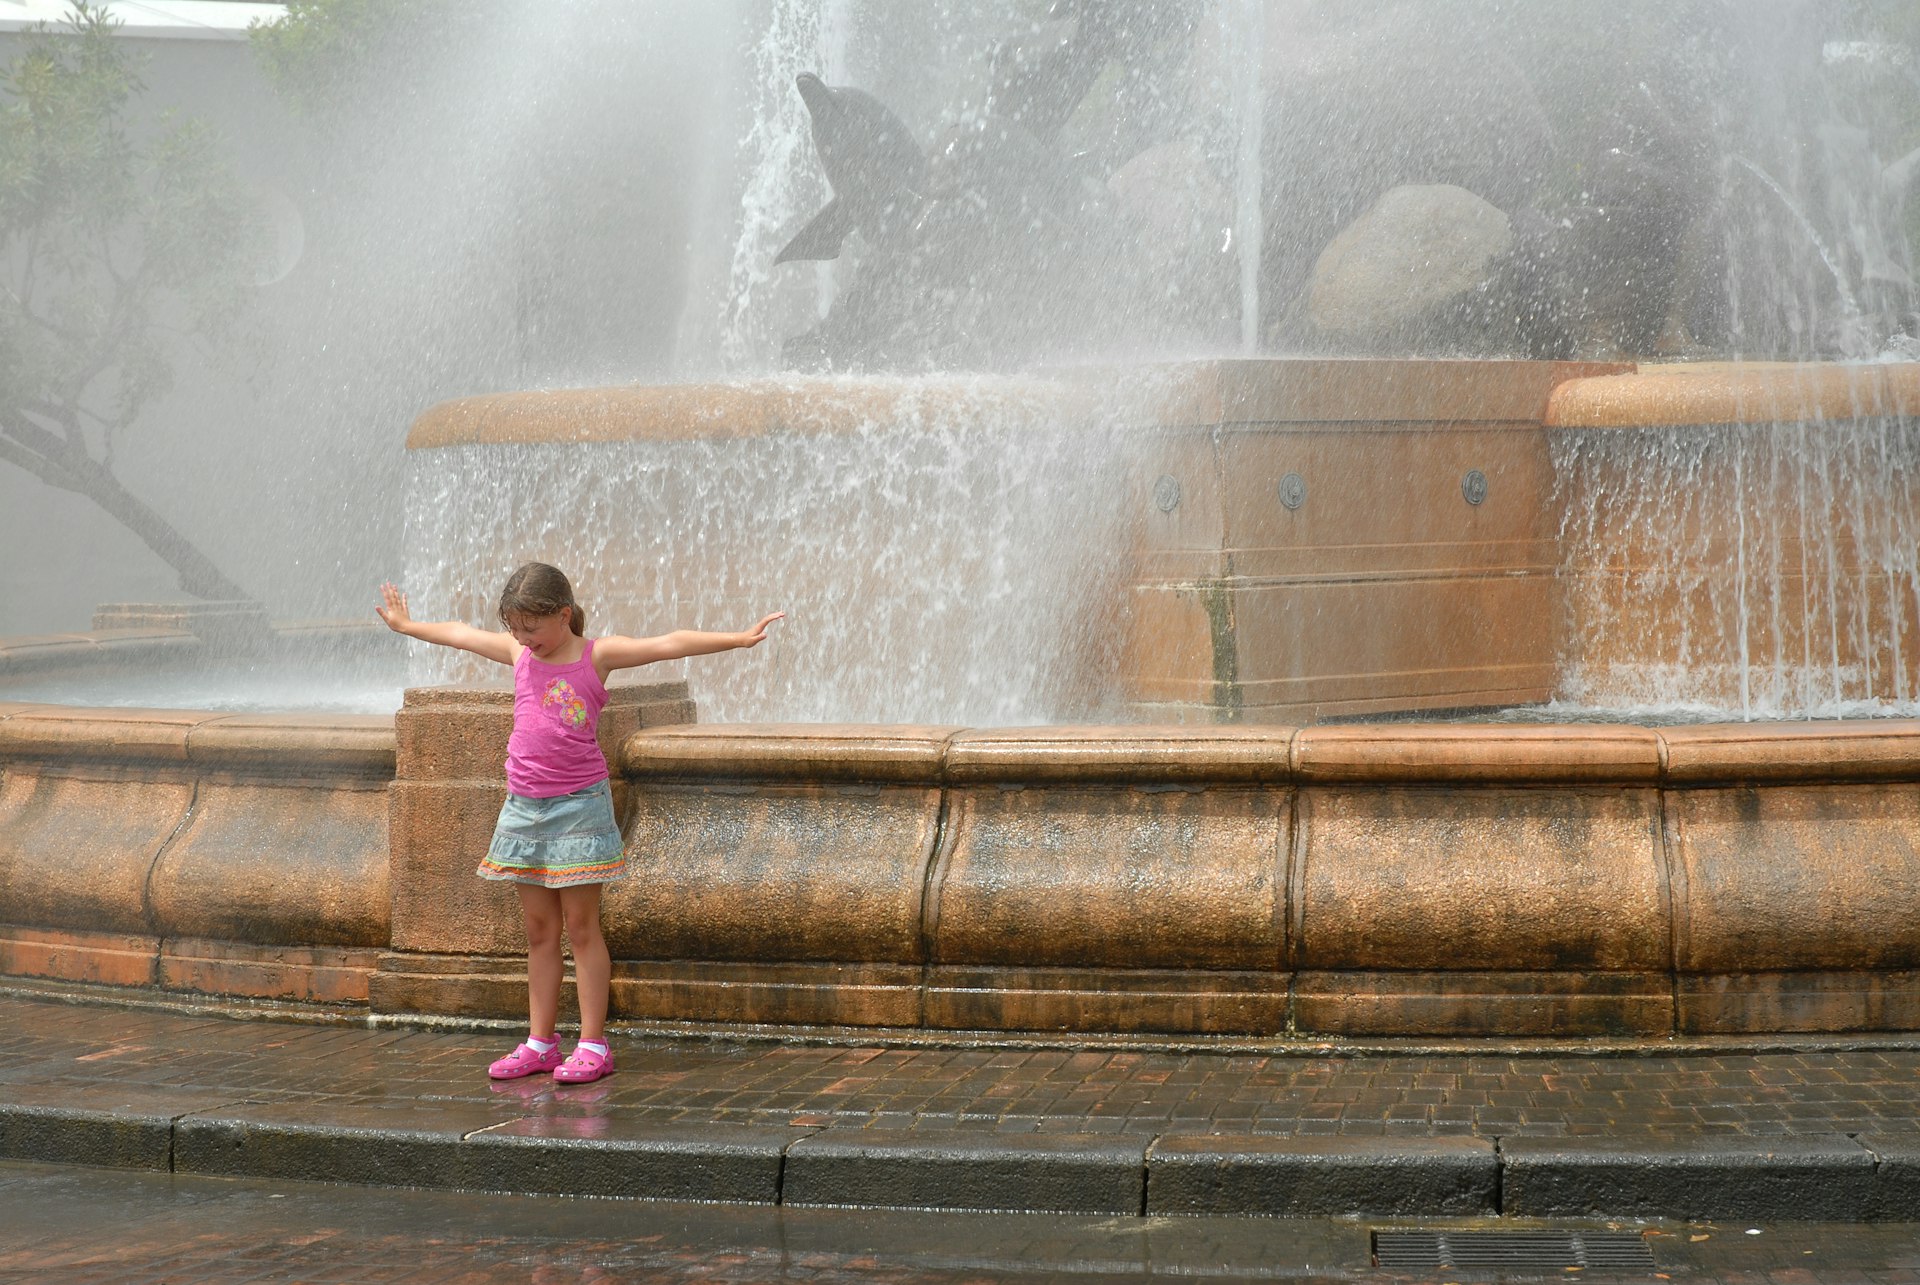 A young girl cooling off in the fountain mist in Old San Juan Puerto Rico